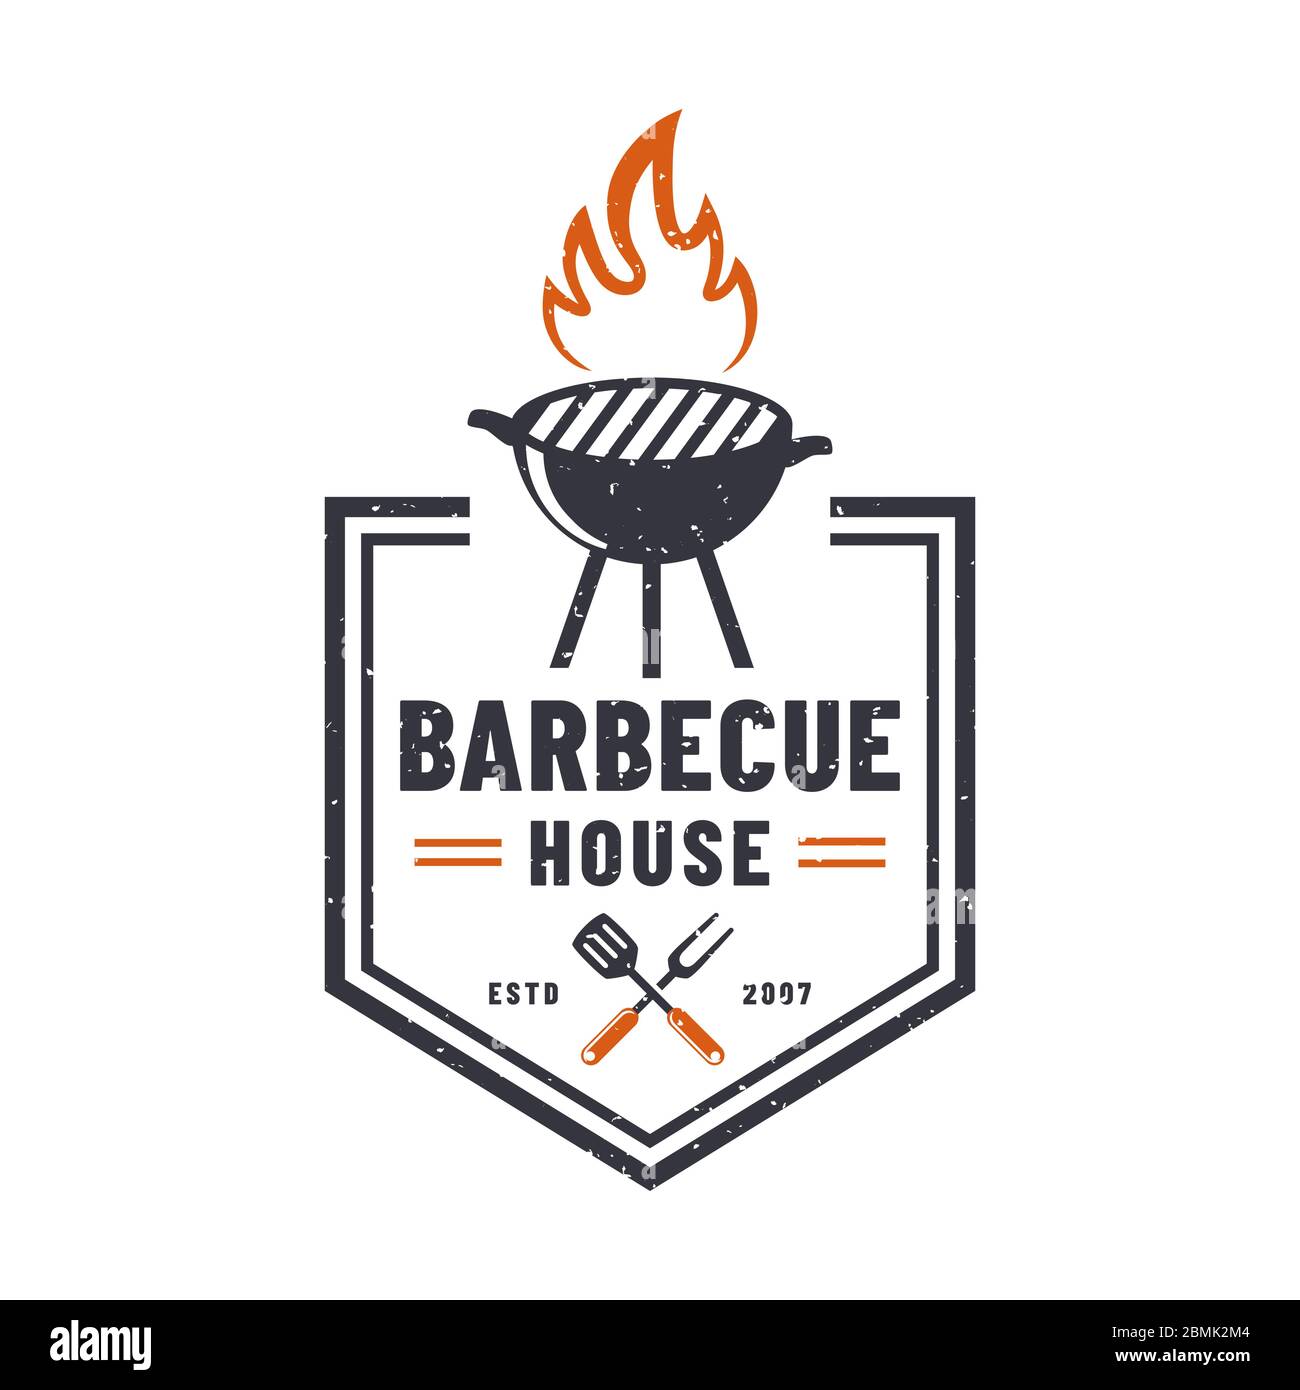 Barbecue house logo isolated on white background. Retro emblem with grill. Vector badge for BBQ restaurant. Stock Vector